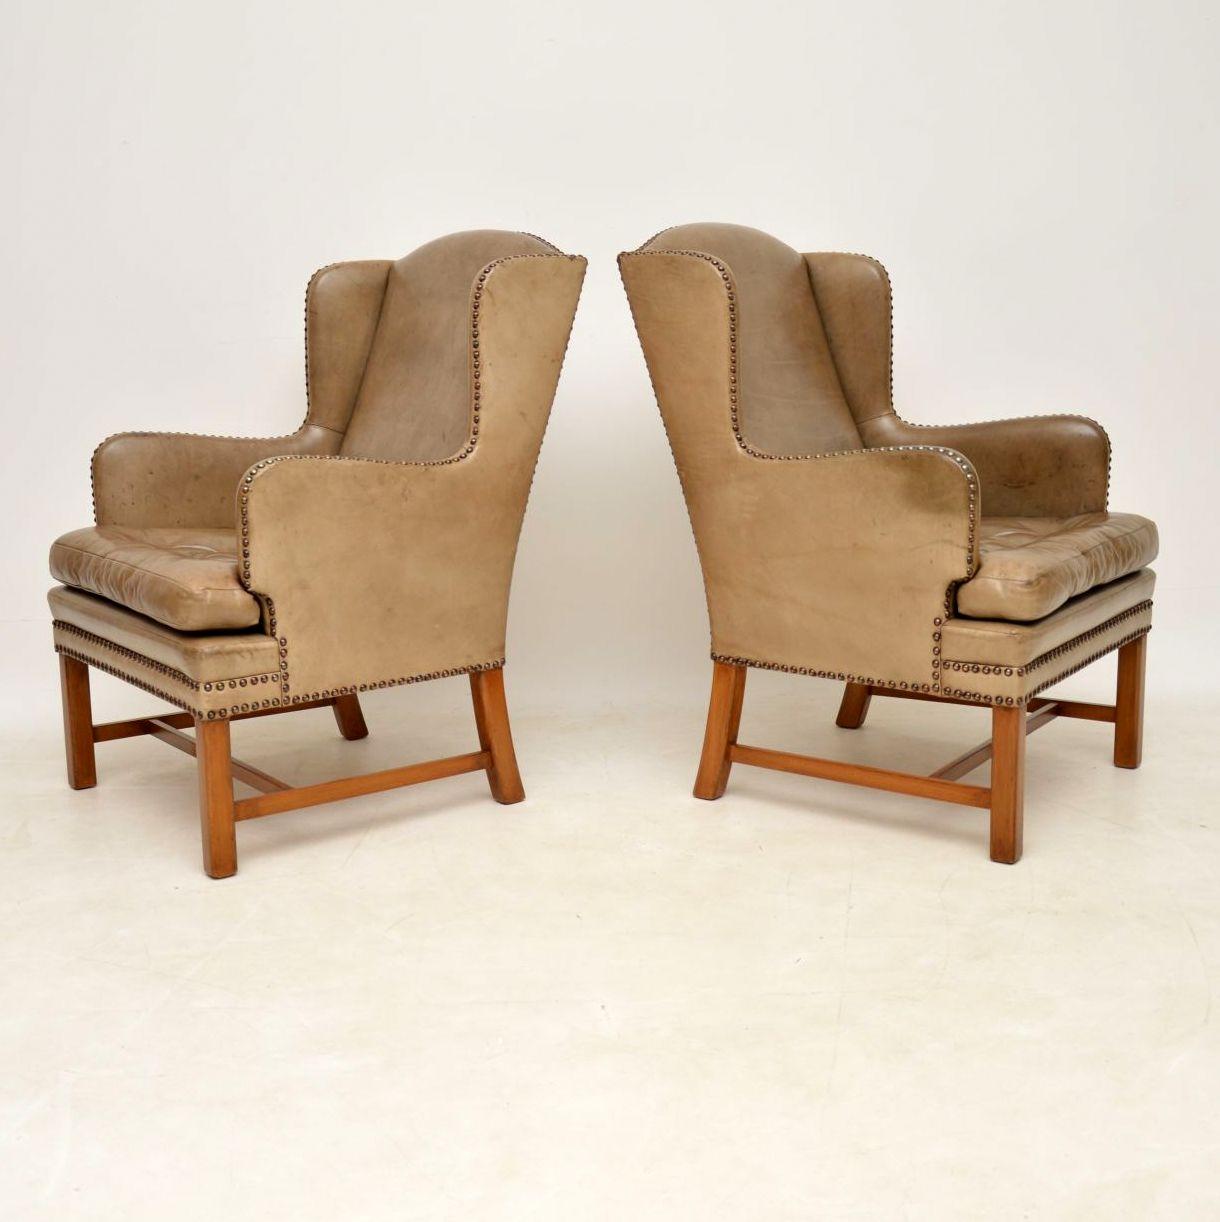 Pair of Antique Swedish Leather Wingback Armchairs (Edwardian)